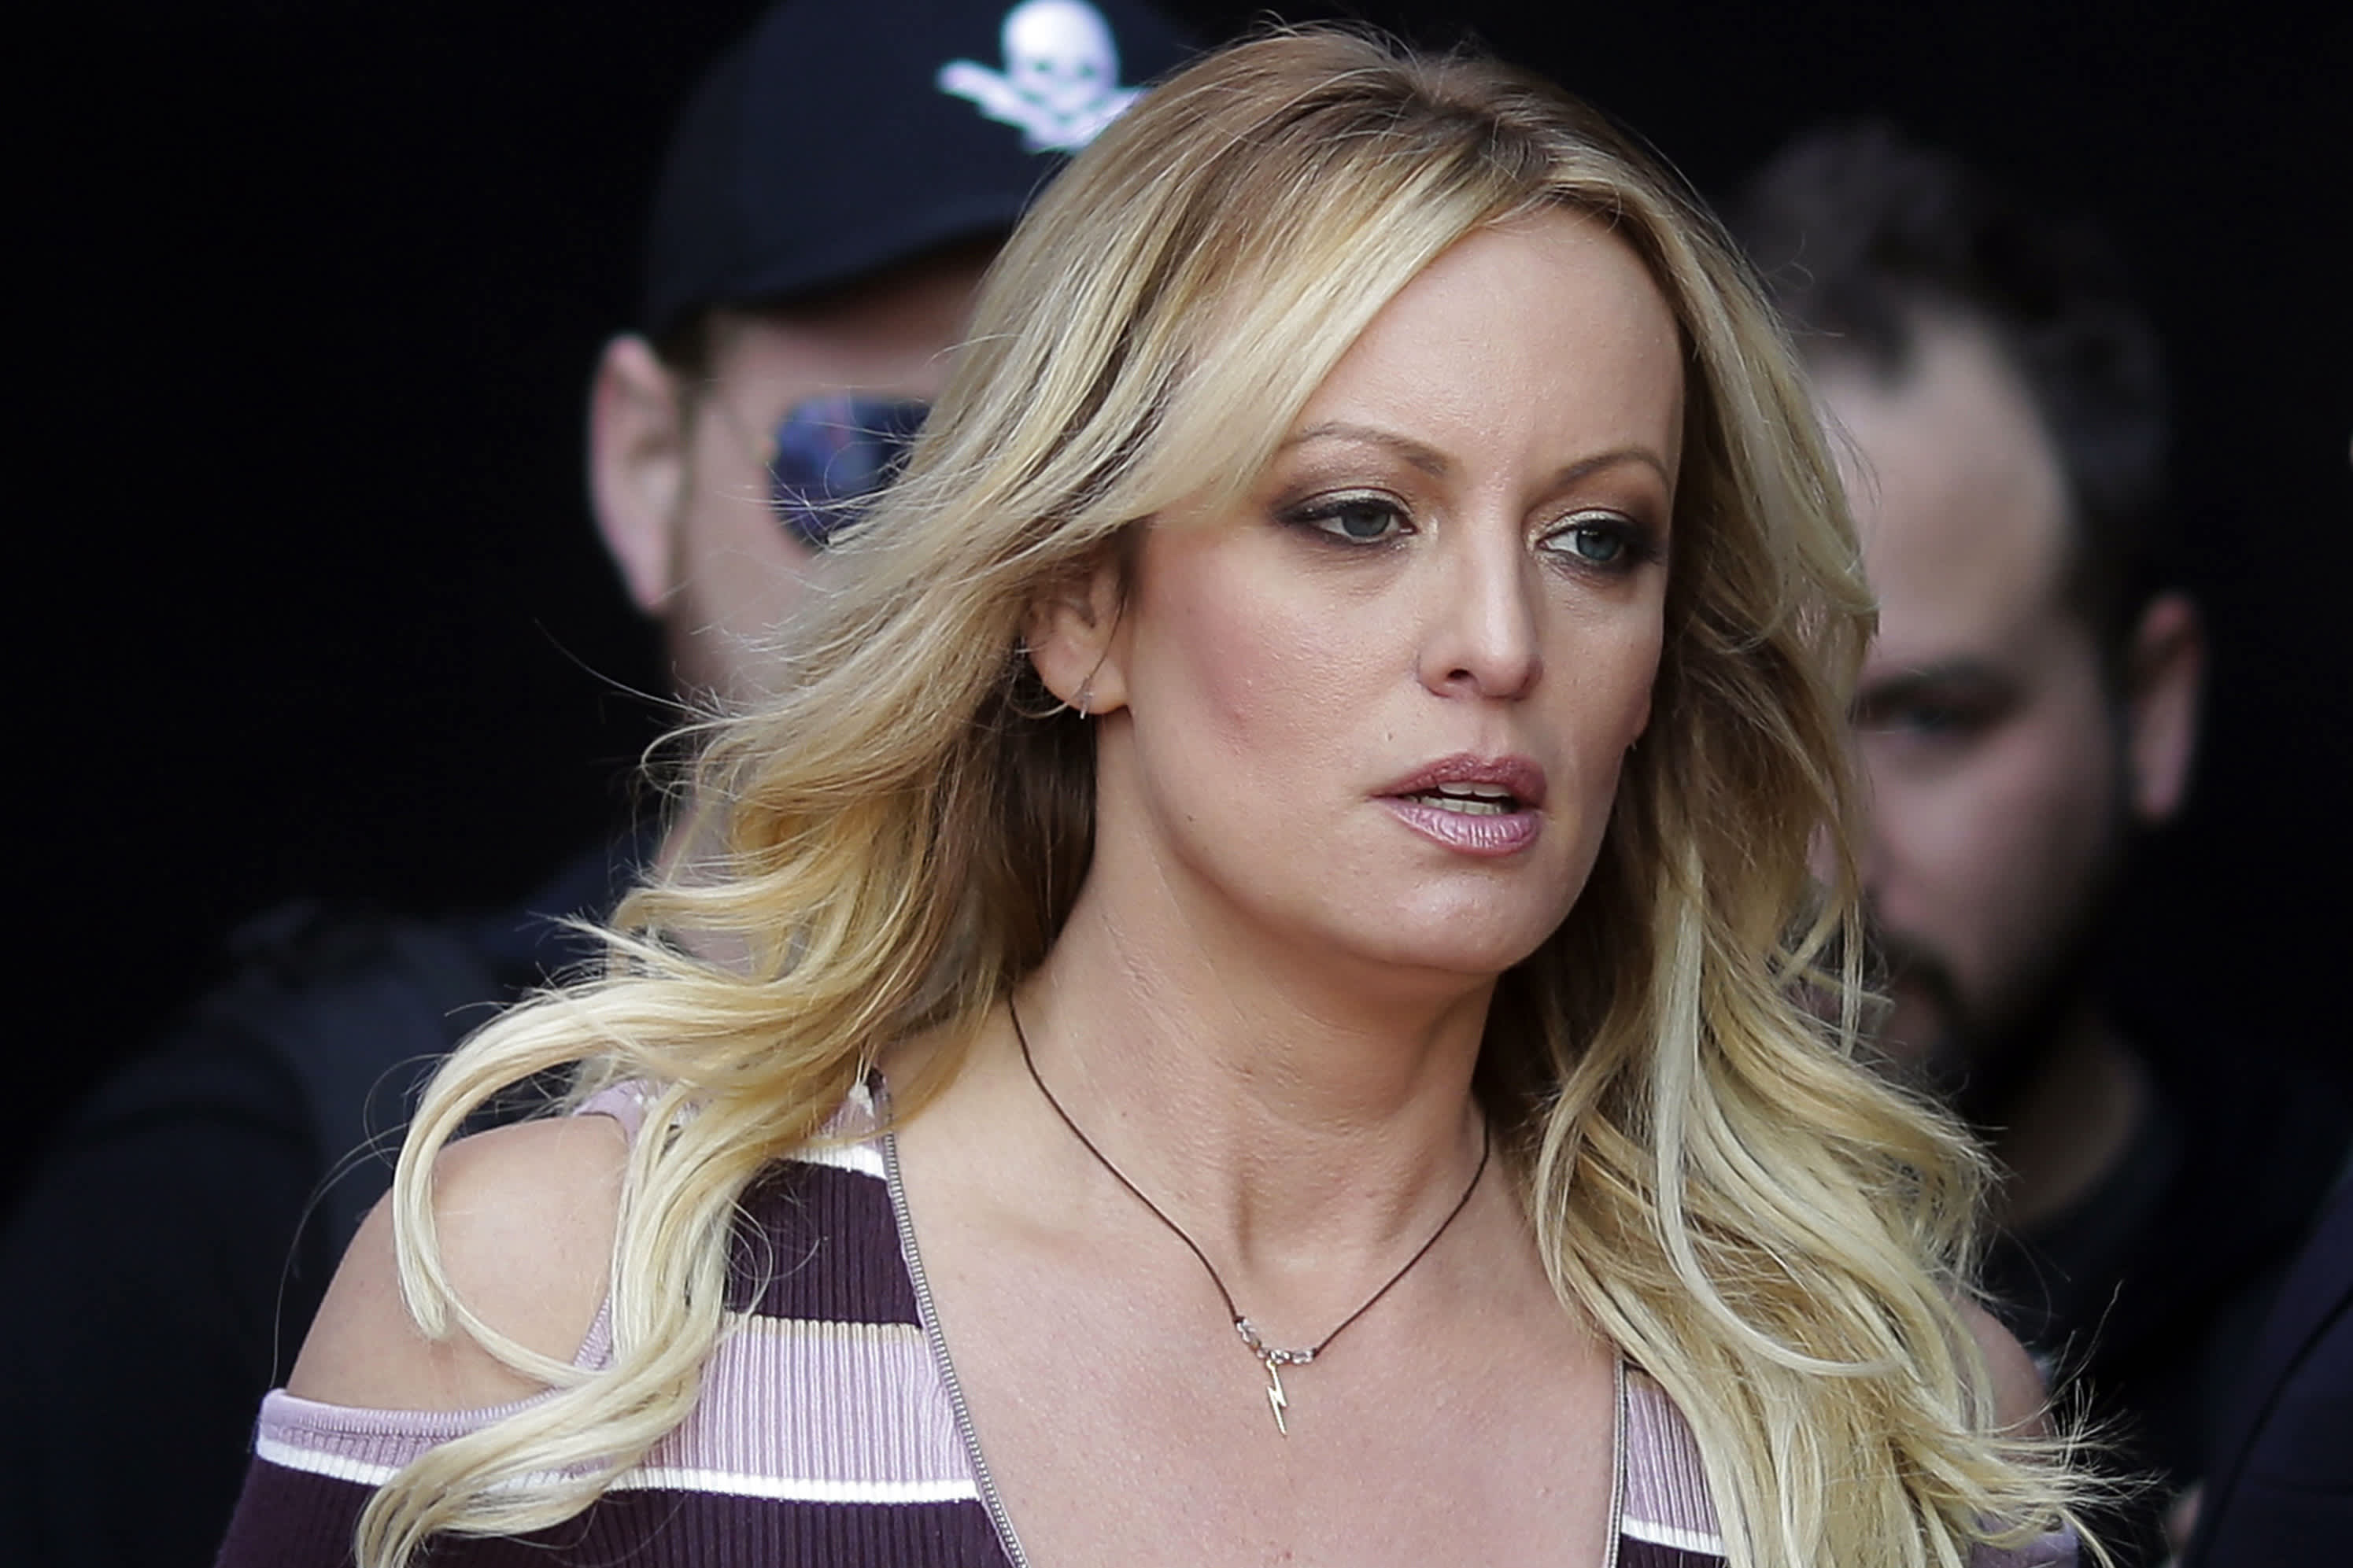 Trump probe Porn star Stormy Daniels says shell dance if hes jailed